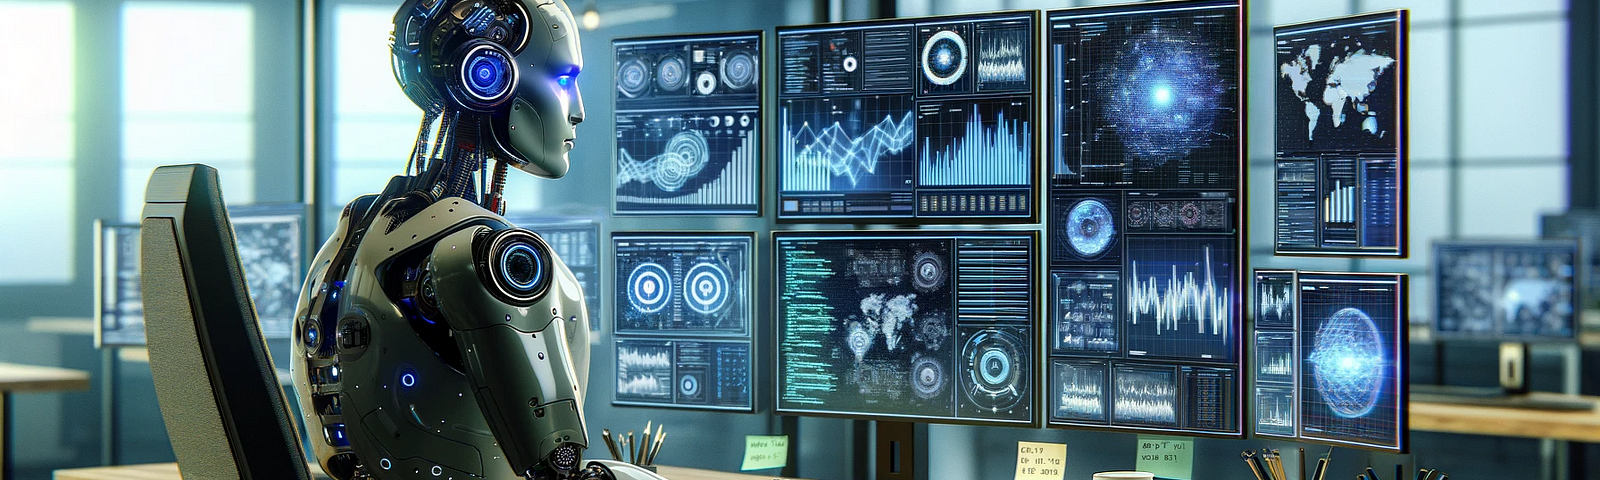 Robot looking at a number of charts and visualizations.